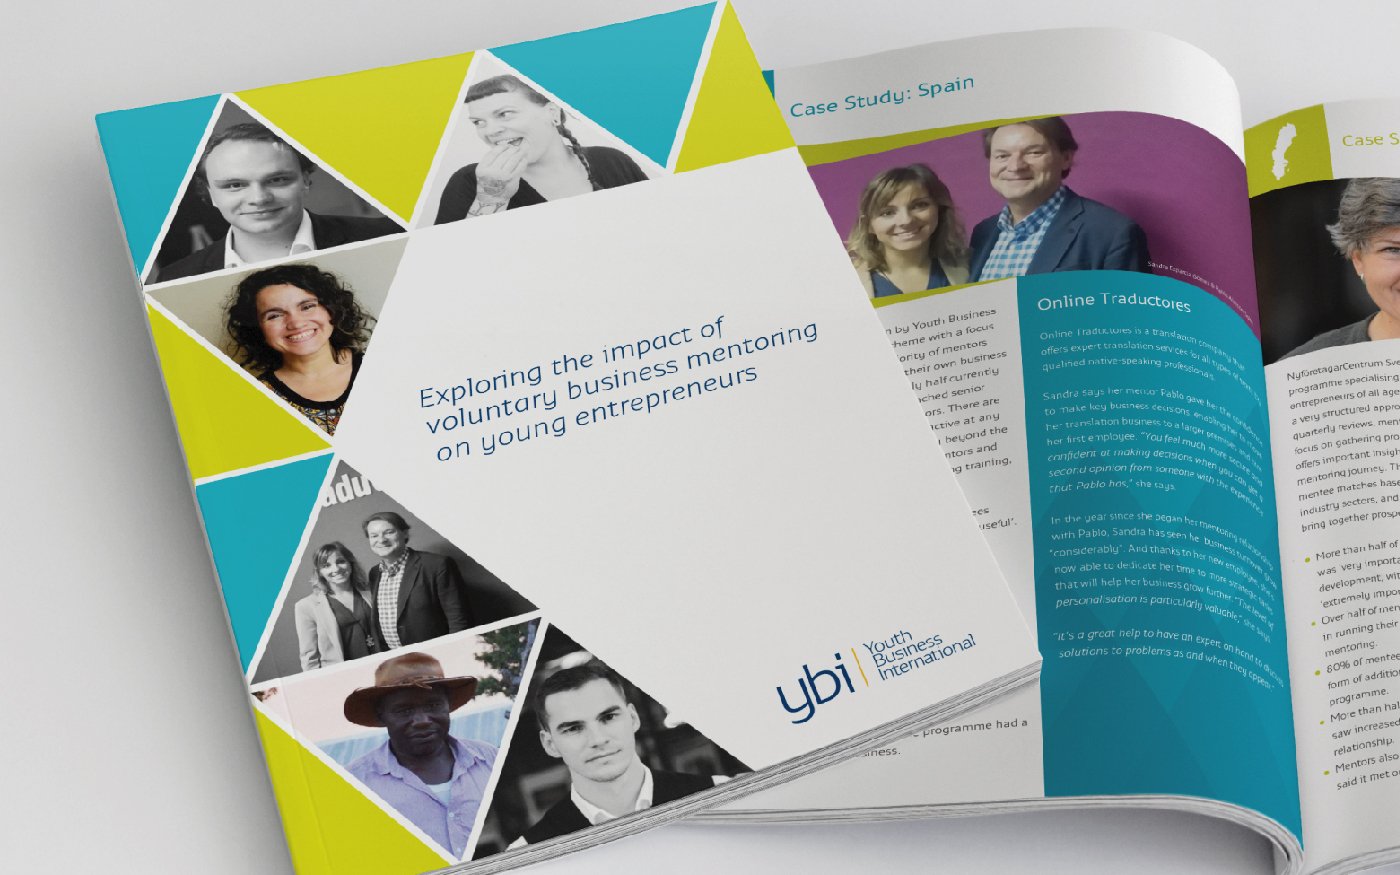 Exploring the impact of voluntary business mentoring on young entrepreneurs